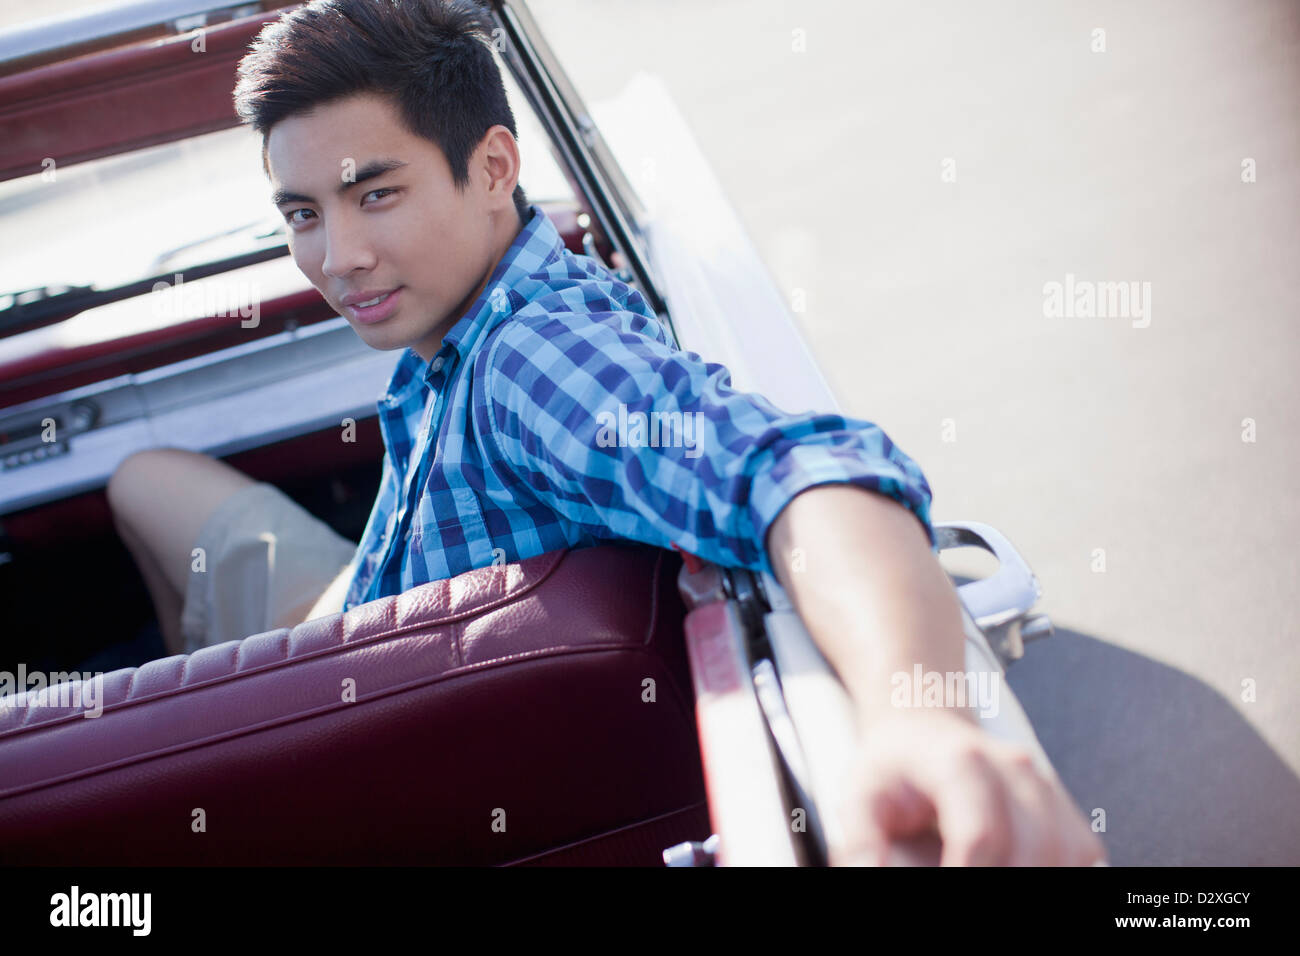 Man sitting in convertible Stock Photo